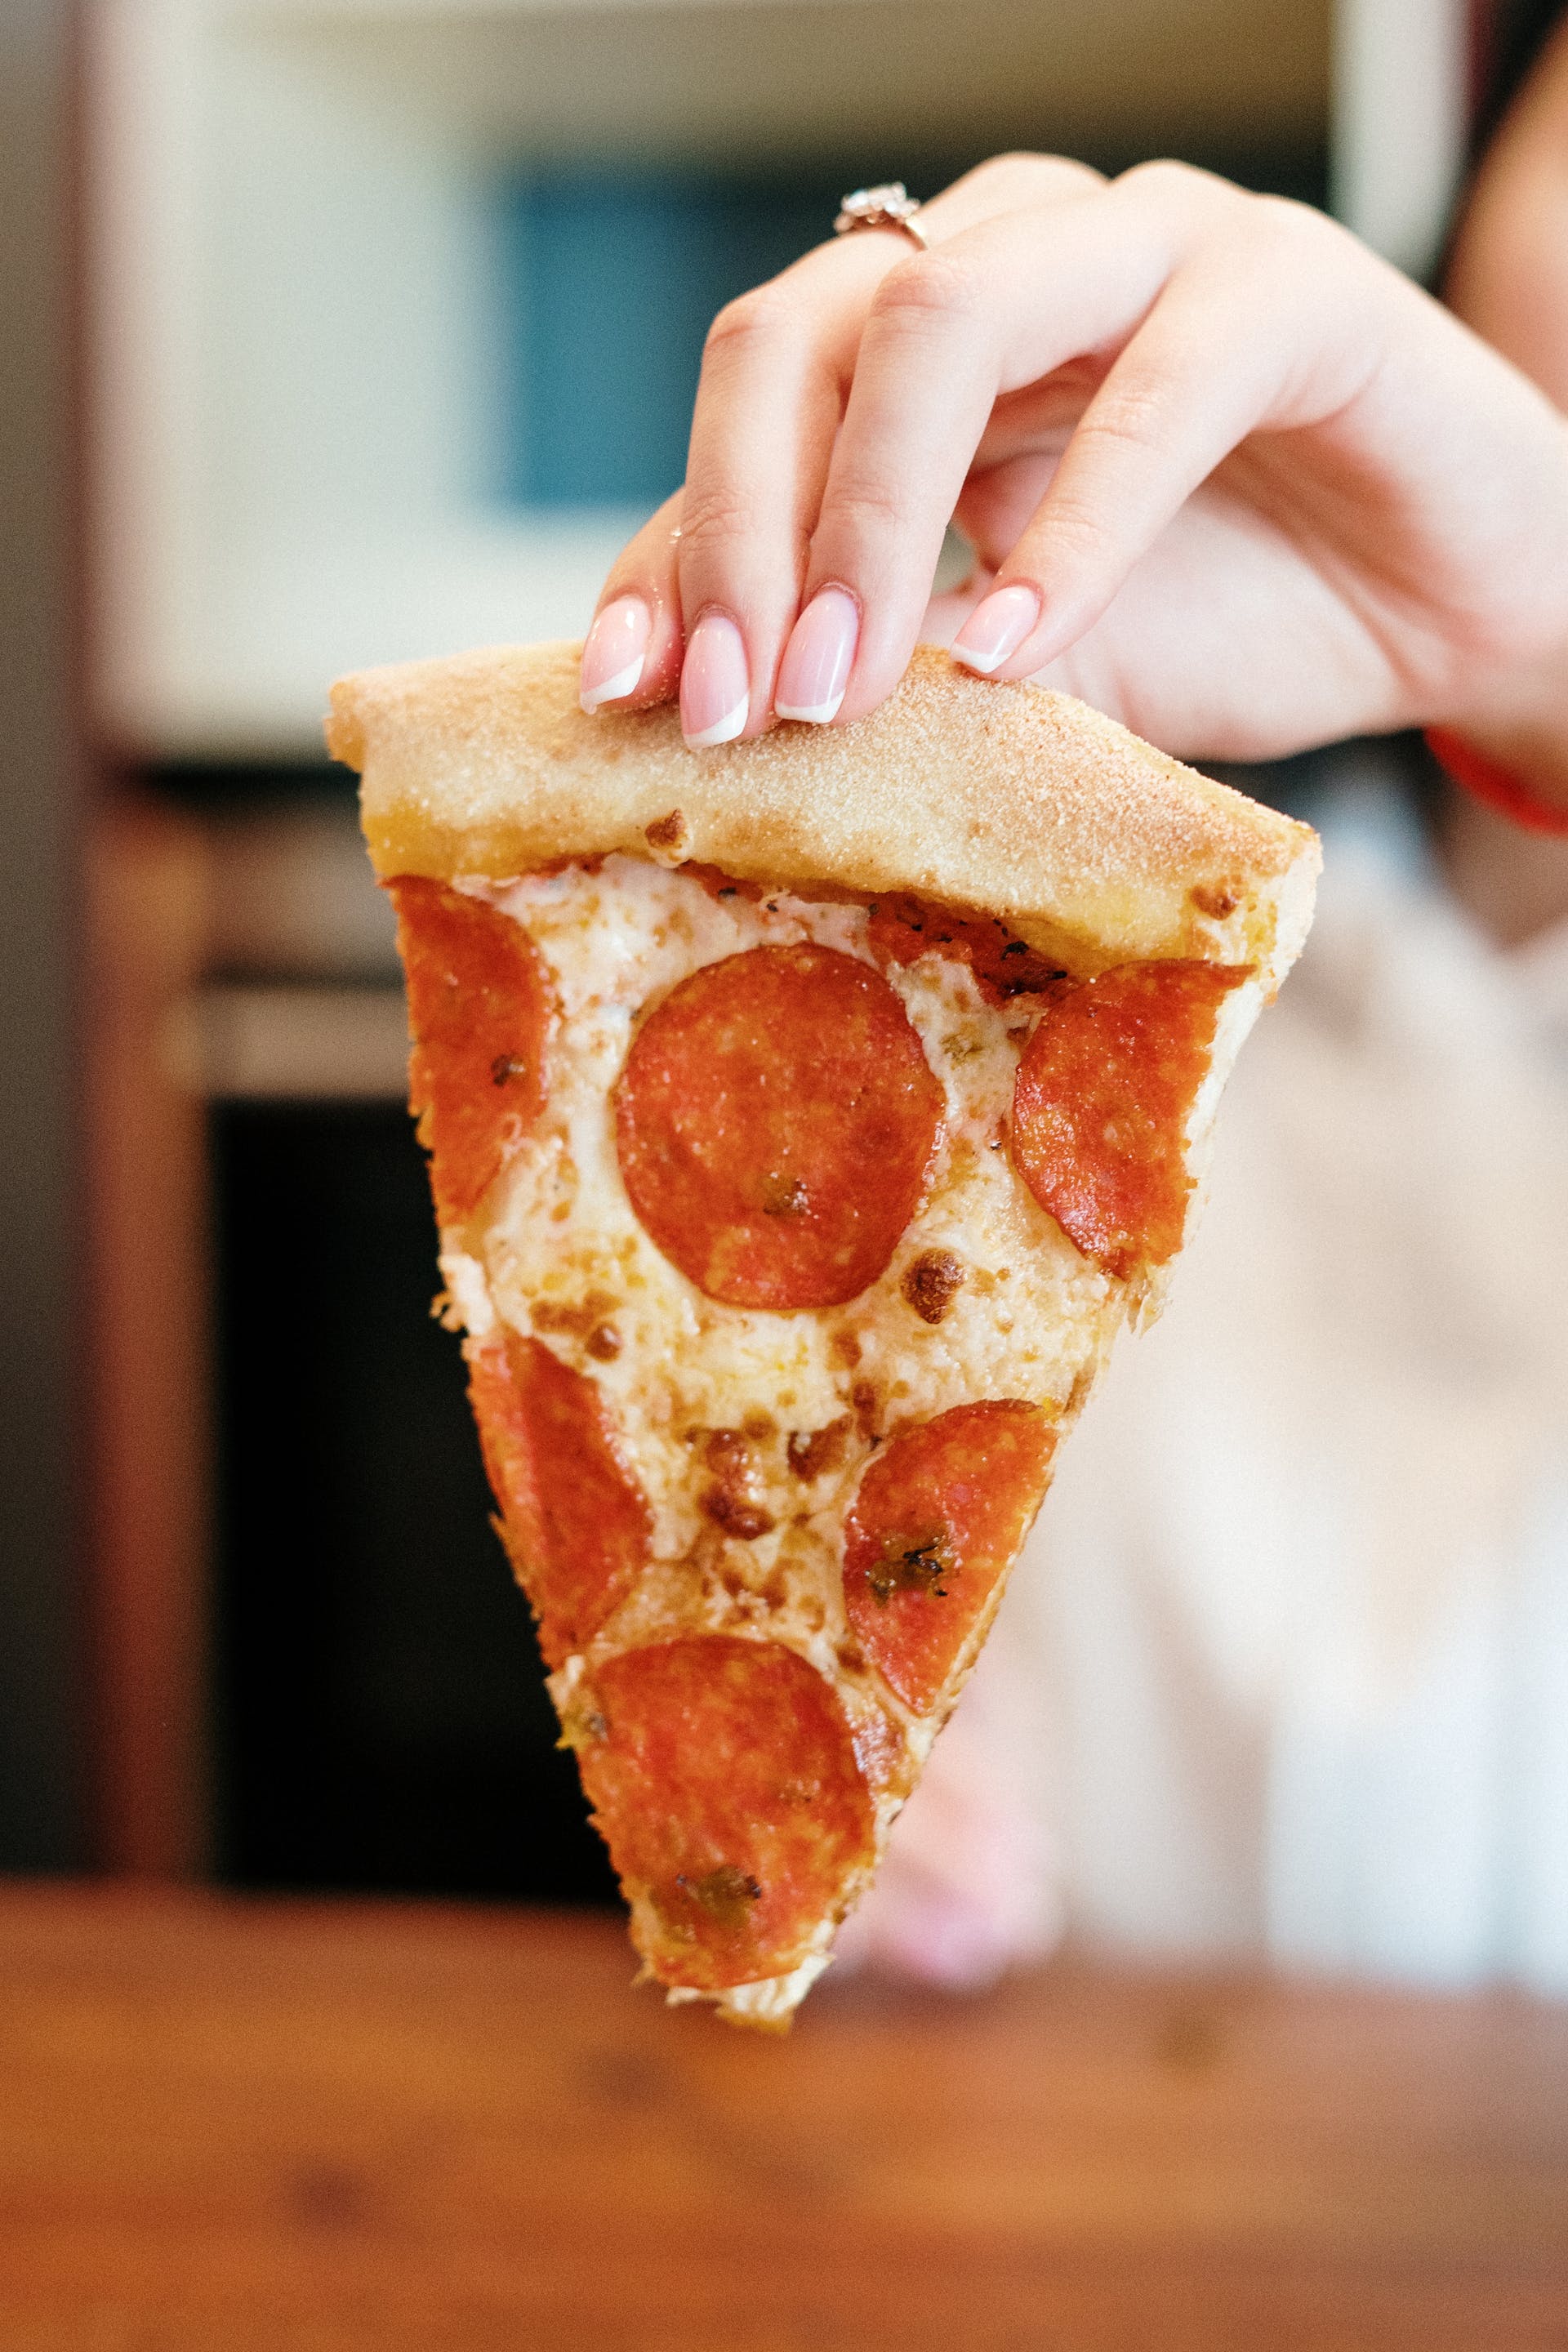 A woman holding a slice of pizza | Source: Pexels